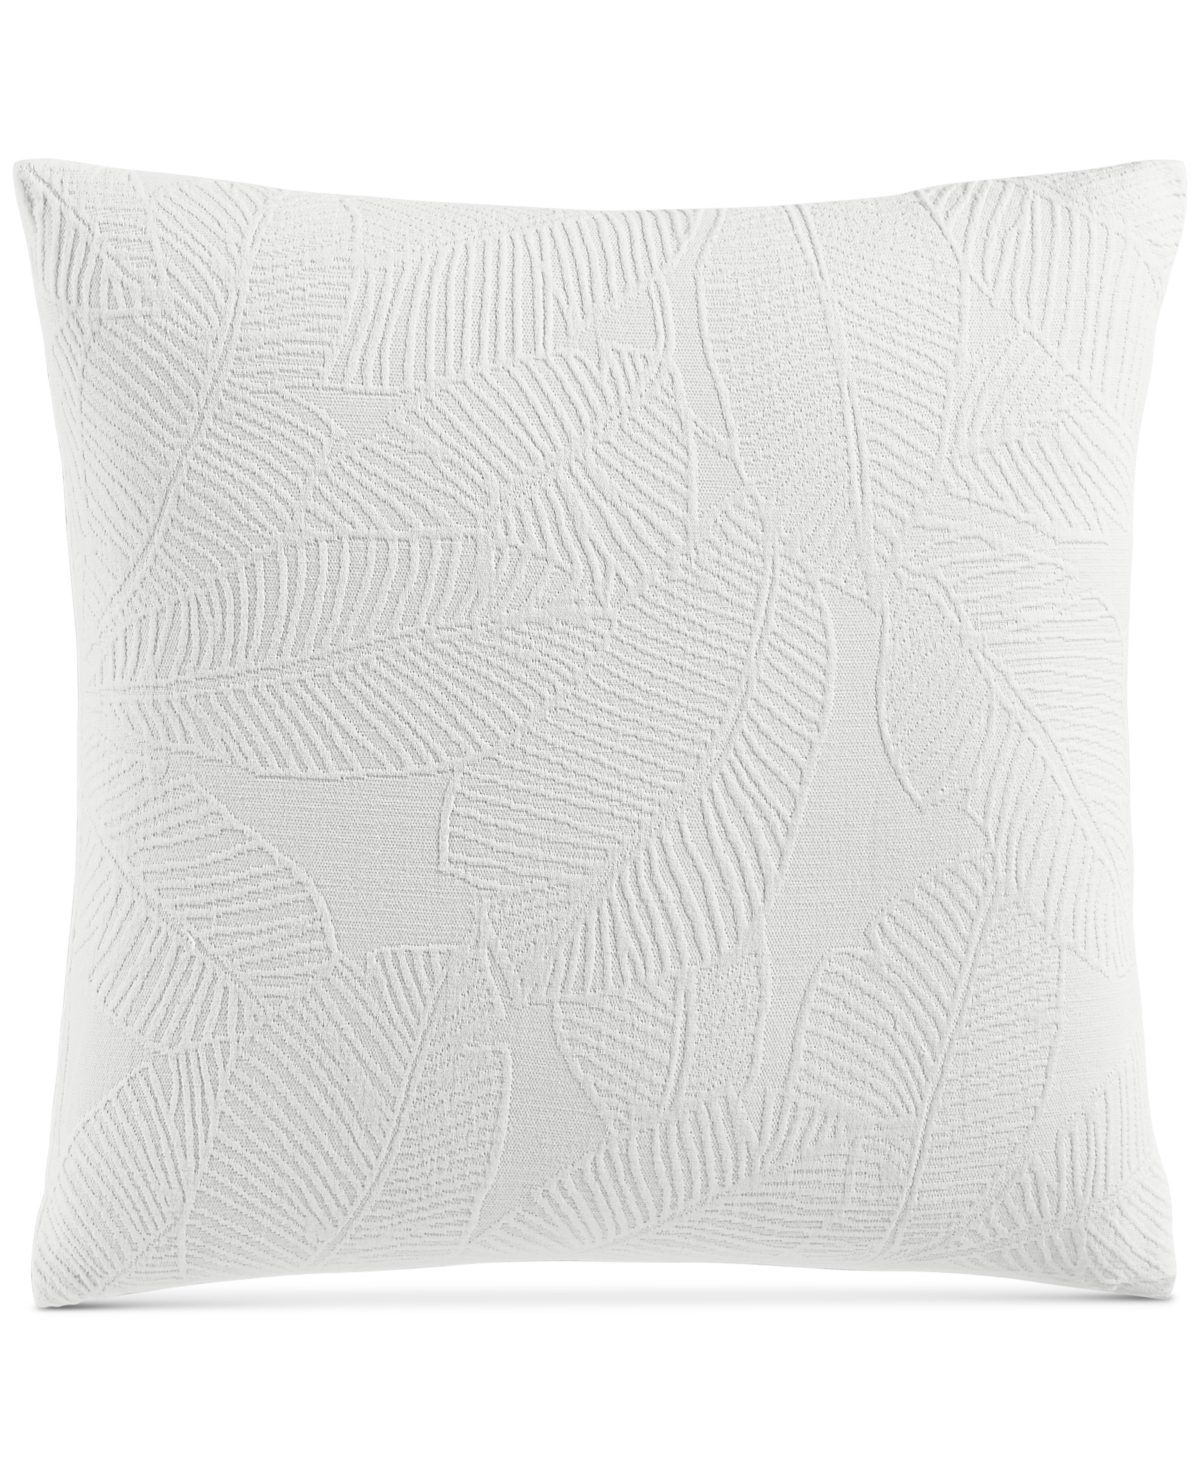 Charter Club Damask Designs Woven Leaves Decorative Pillow, 18" x 18", Created for Macy's Bedding